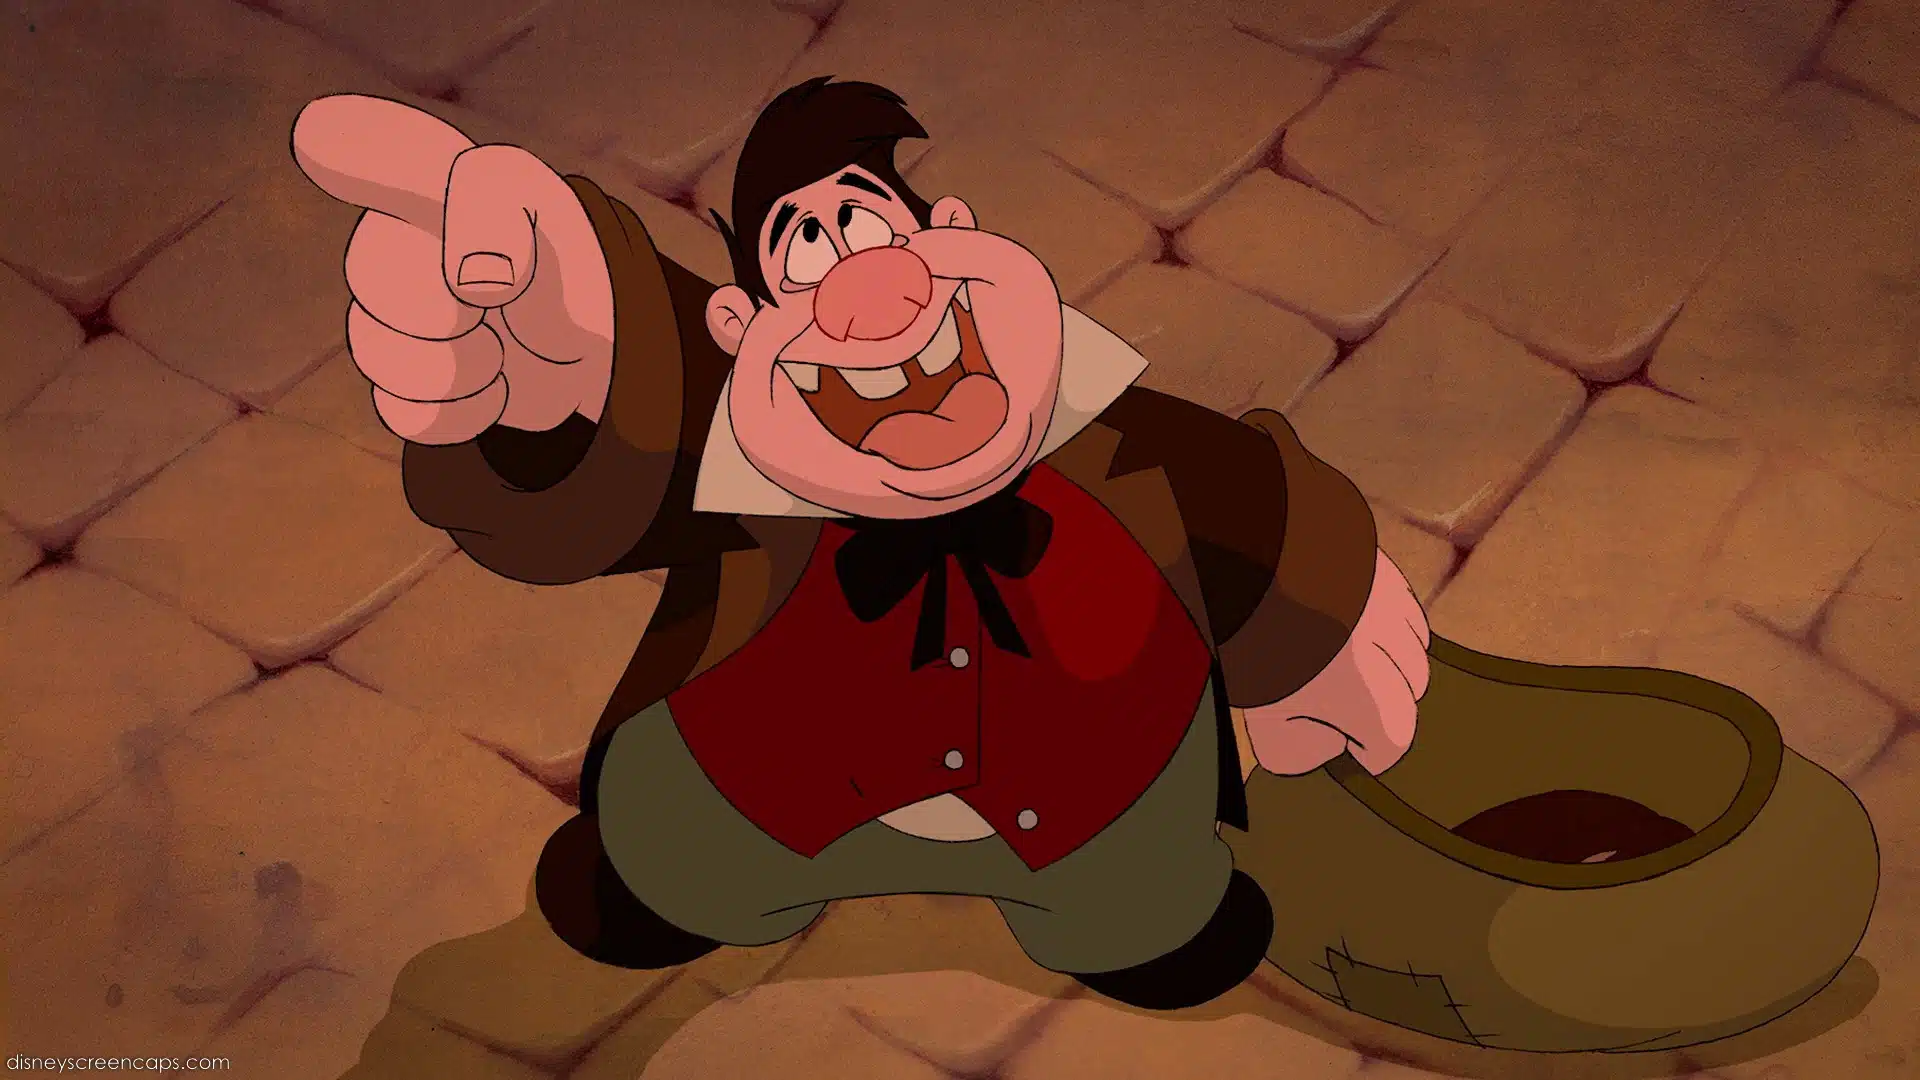 Le Fou from Beauty and the Beast, worthy of a Disney spinoff